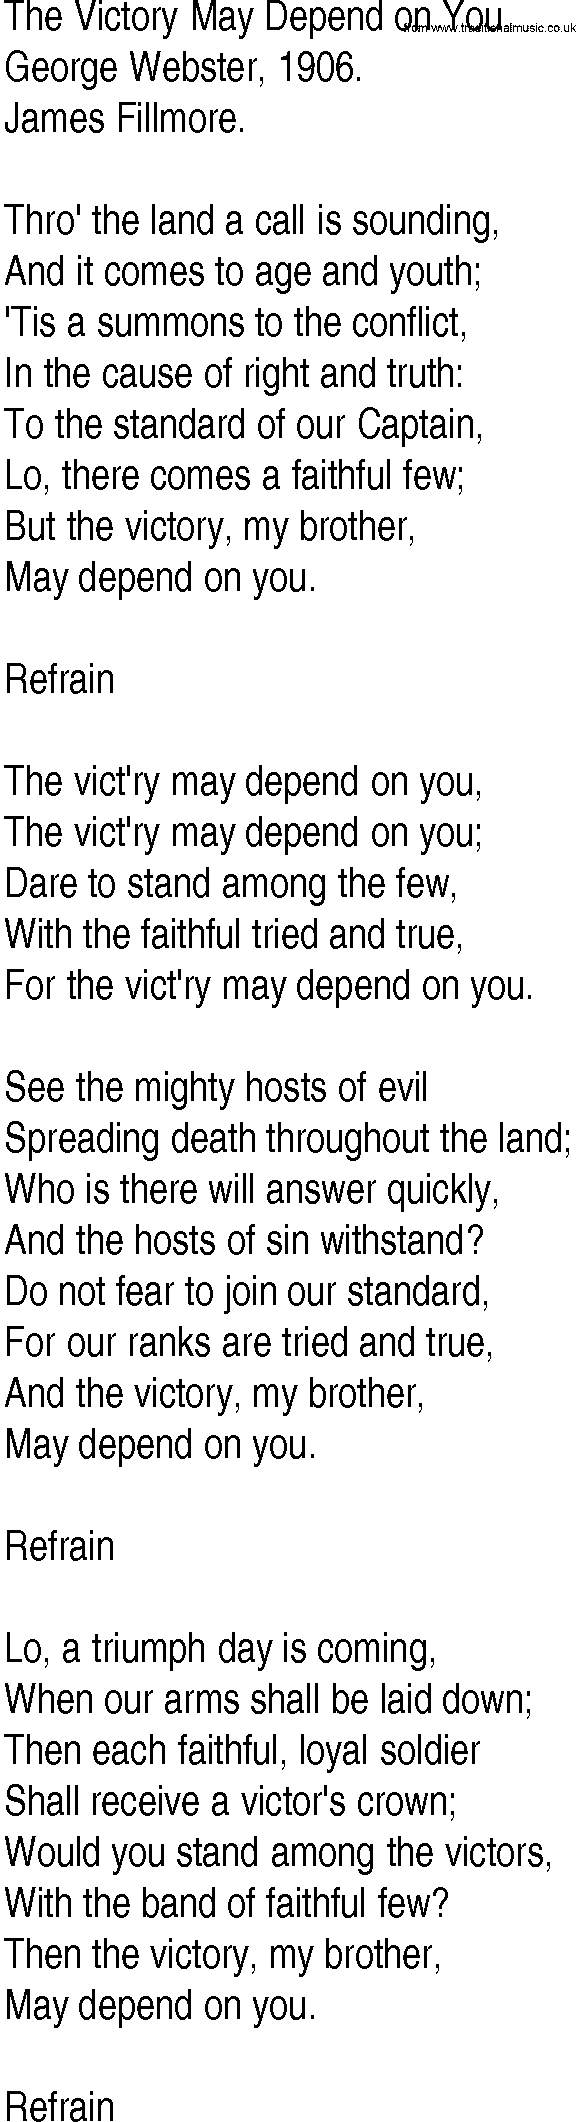 Hymn and Gospel Song: The Victory May Depend on You by George Webster lyrics